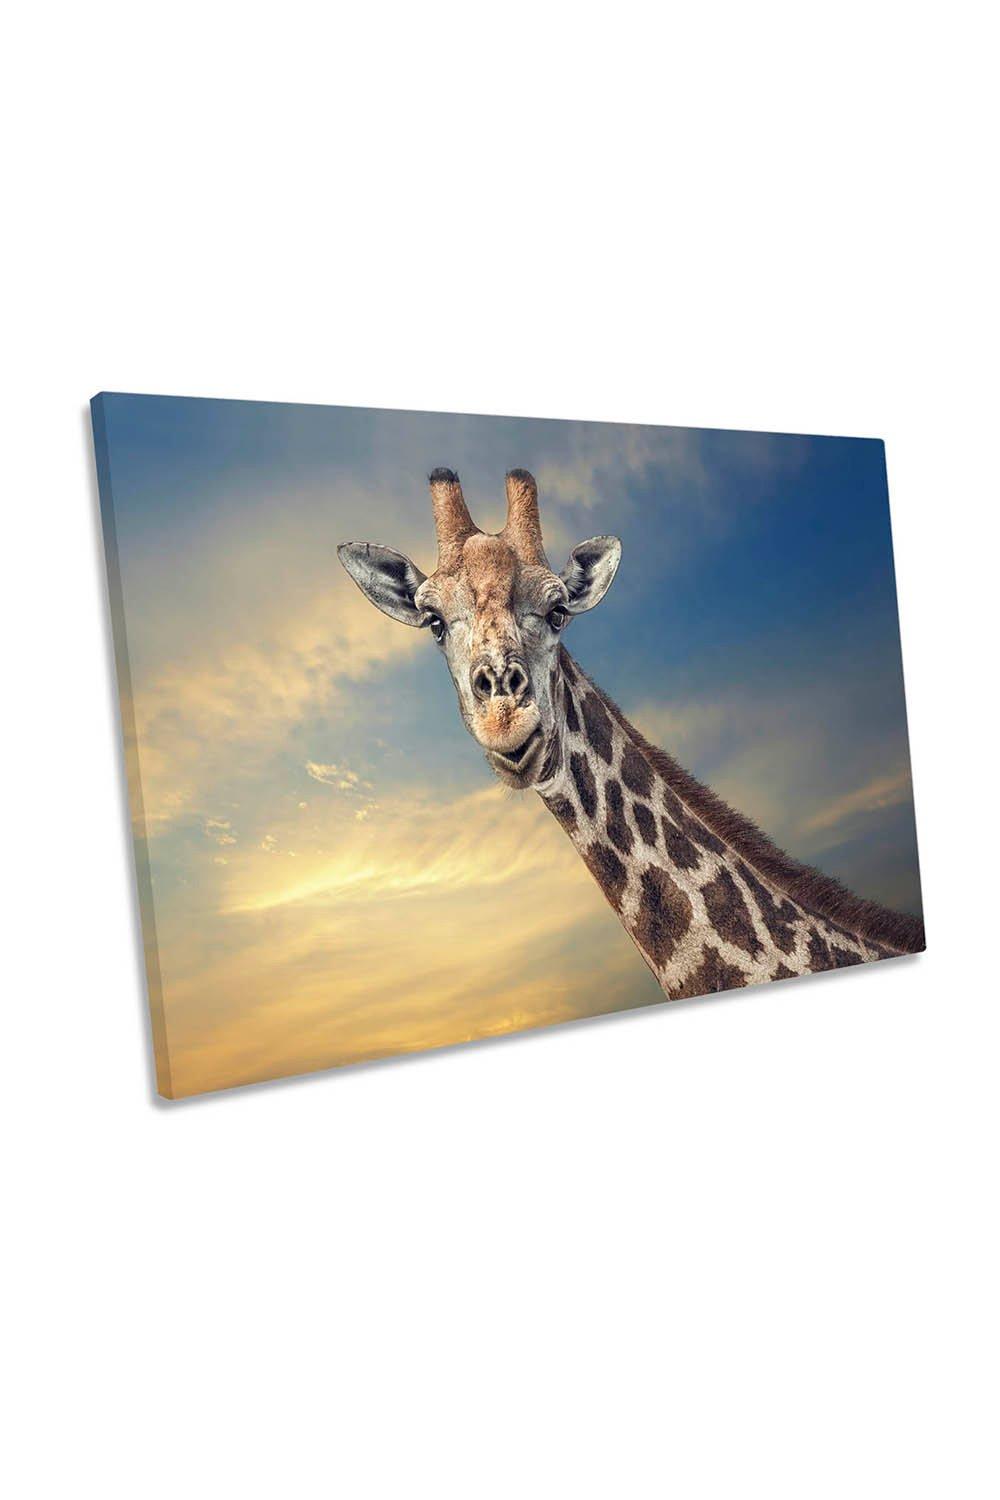 The Friendly Giant Giraffe Canvas Wall Art Picture Print